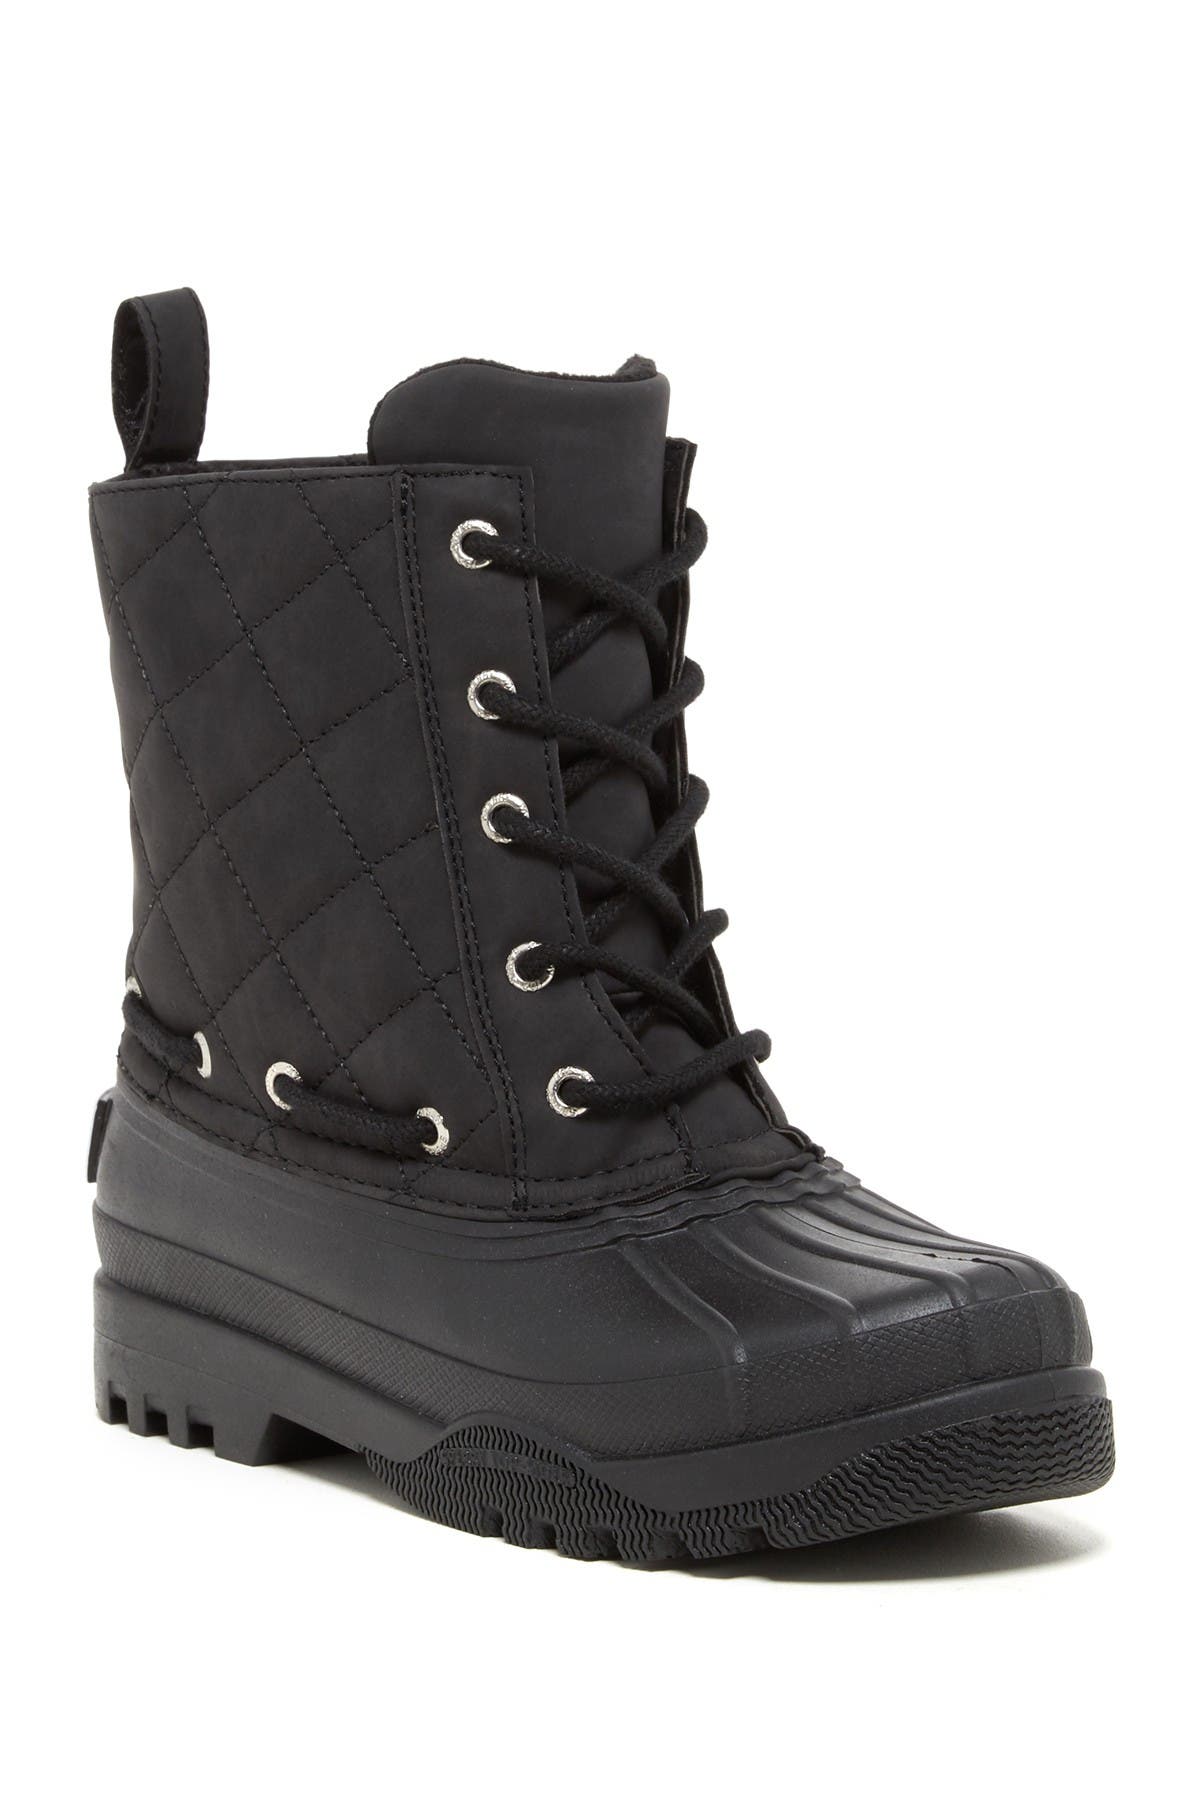 sperry black quilted rain boots